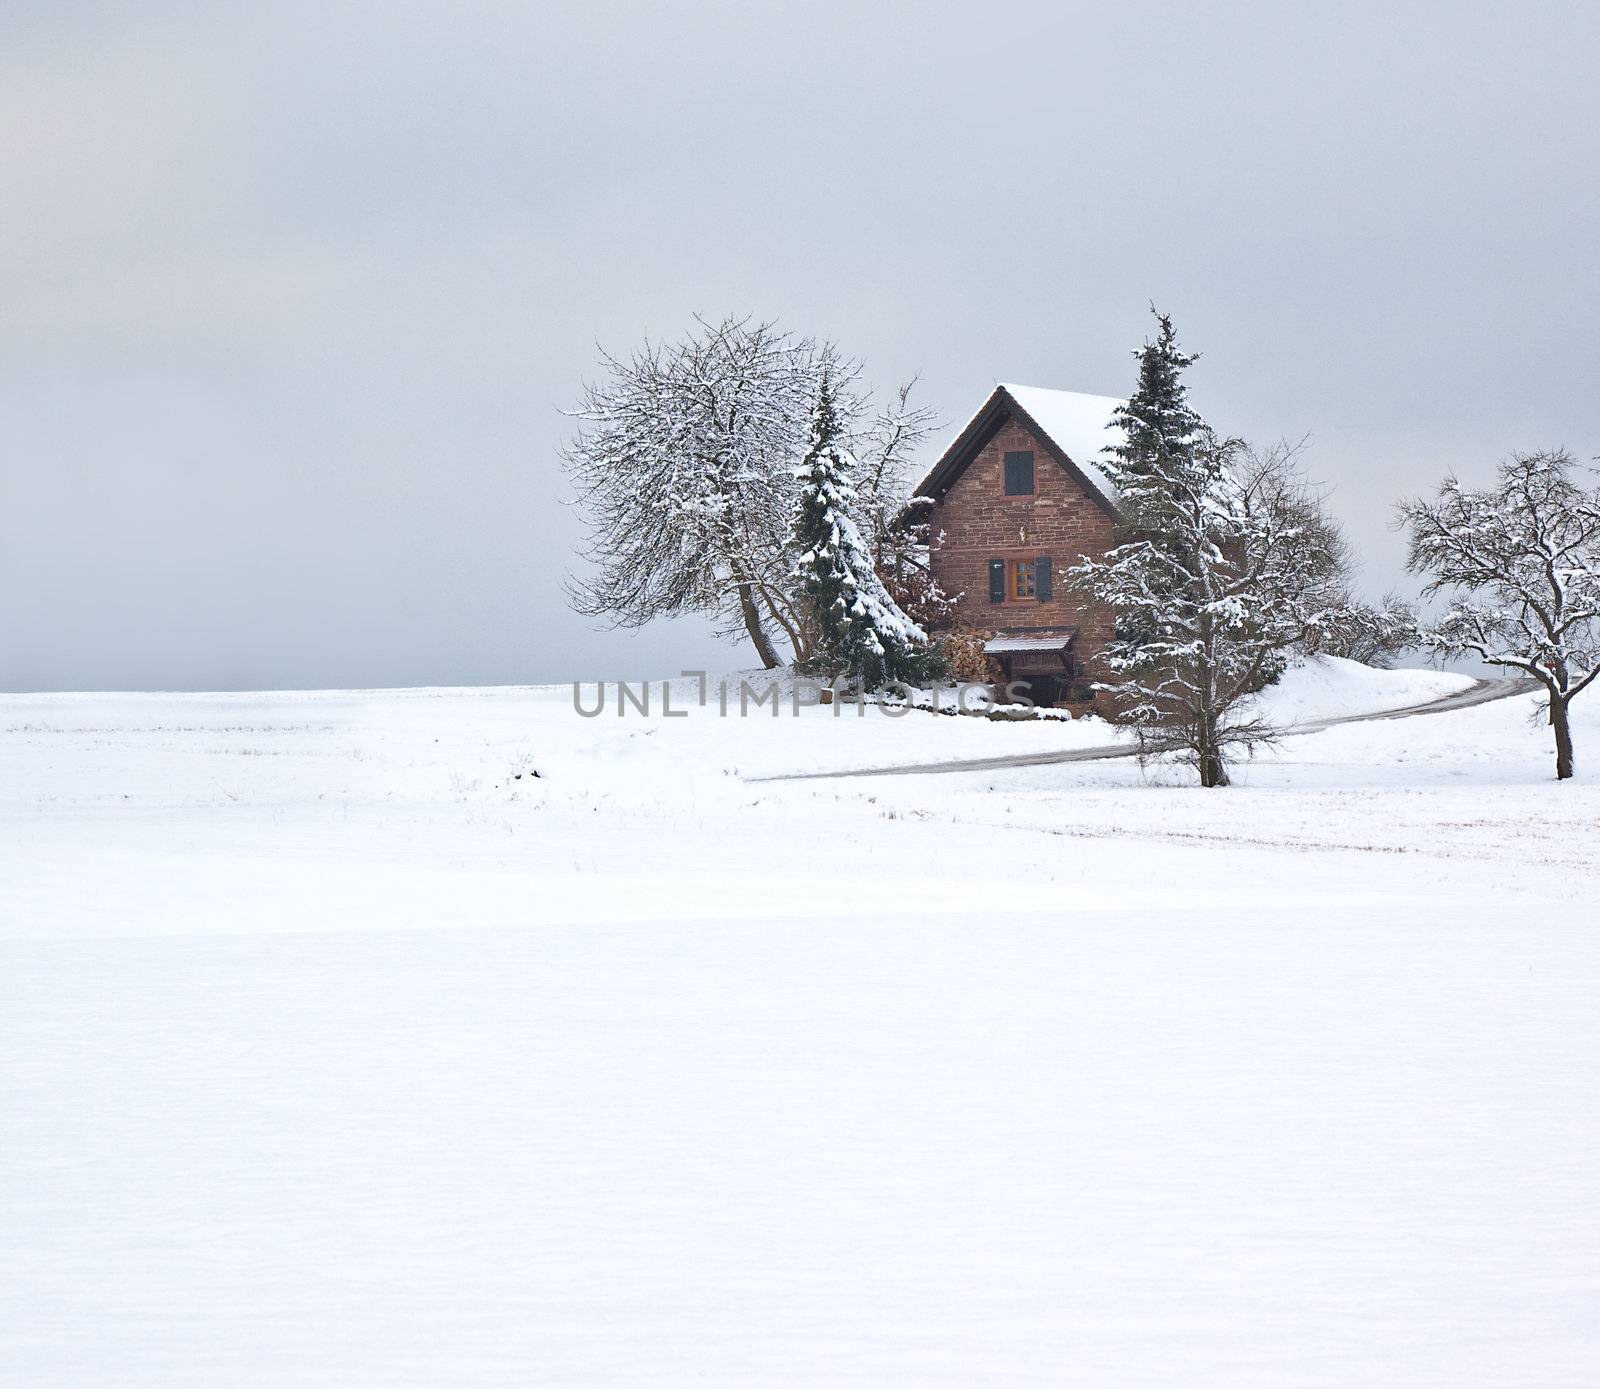 A photography of a winter scenery with a house